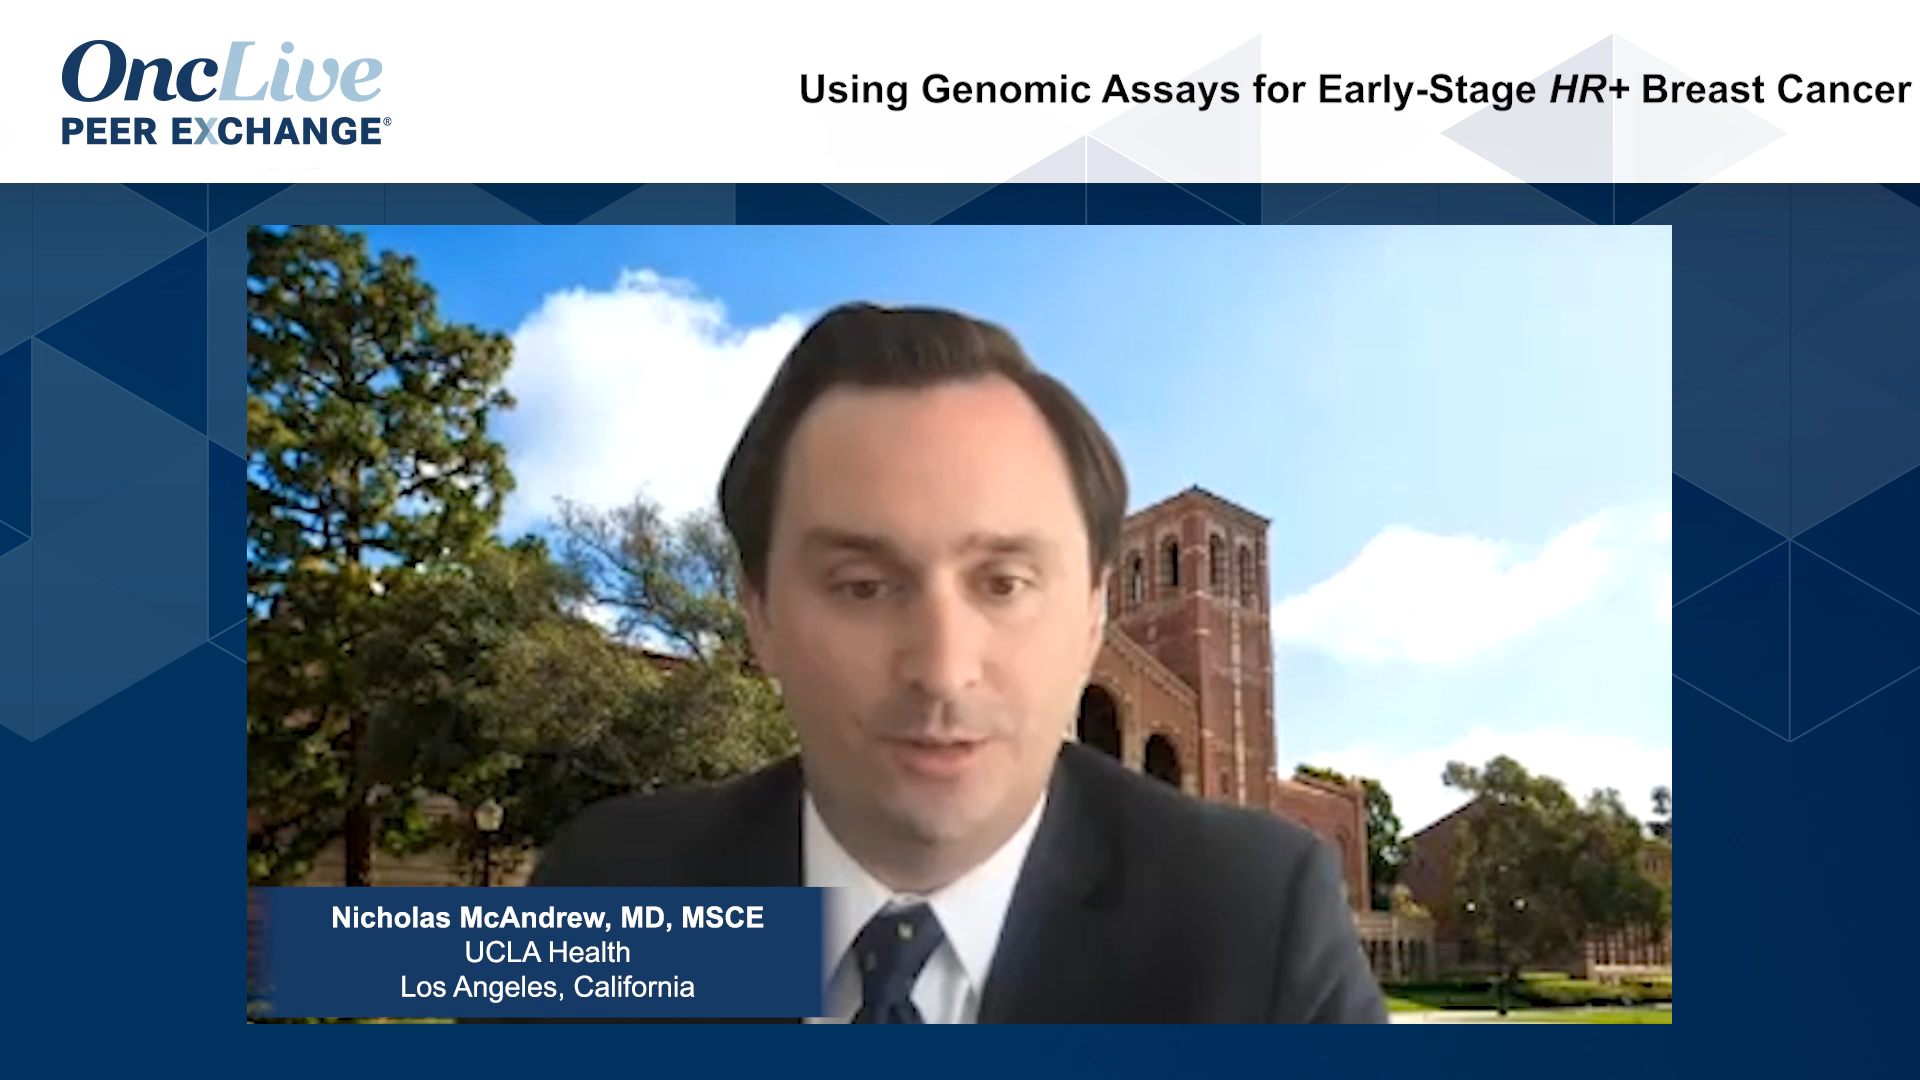 Using Genomic Assays for Early Stage HR+ Breast Cancer